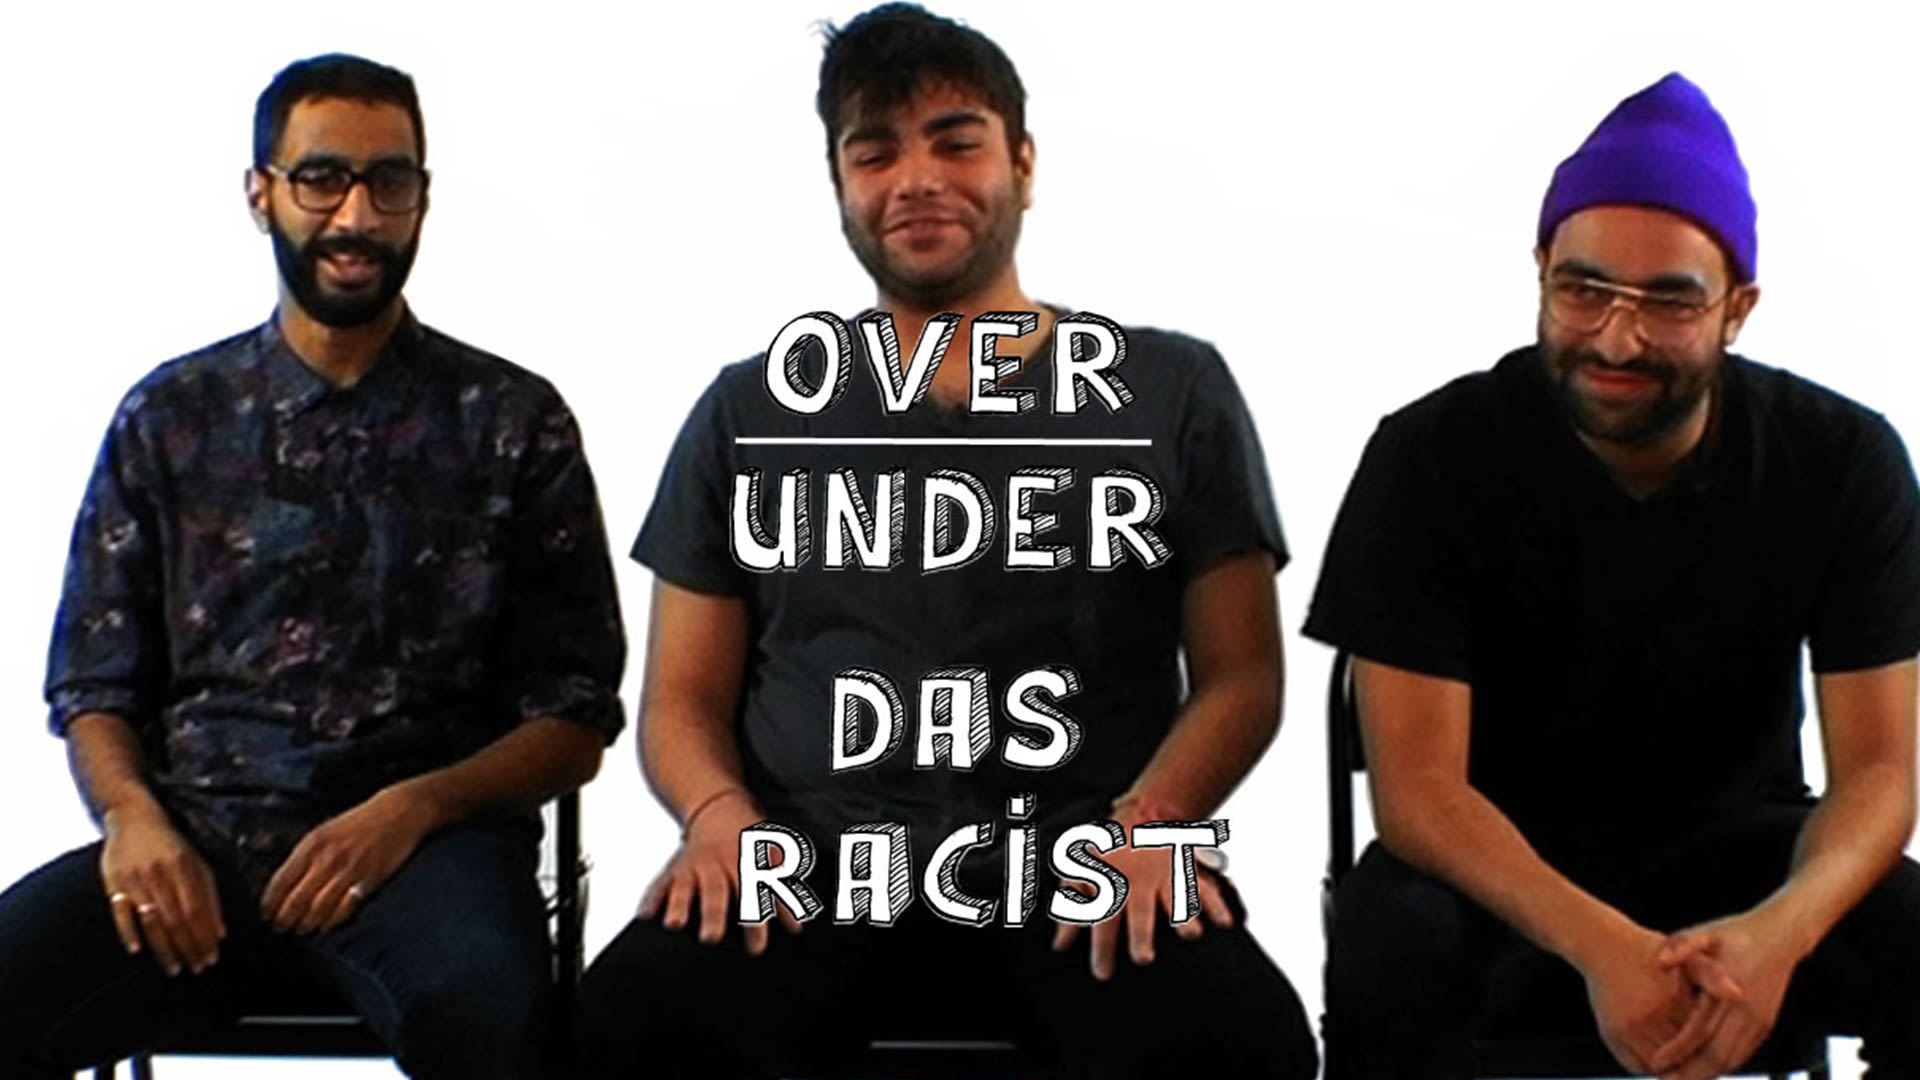 Barely Legal Blowjob Porn - Watch Das Racist - Over / Under | Over/Under | Pitchfork